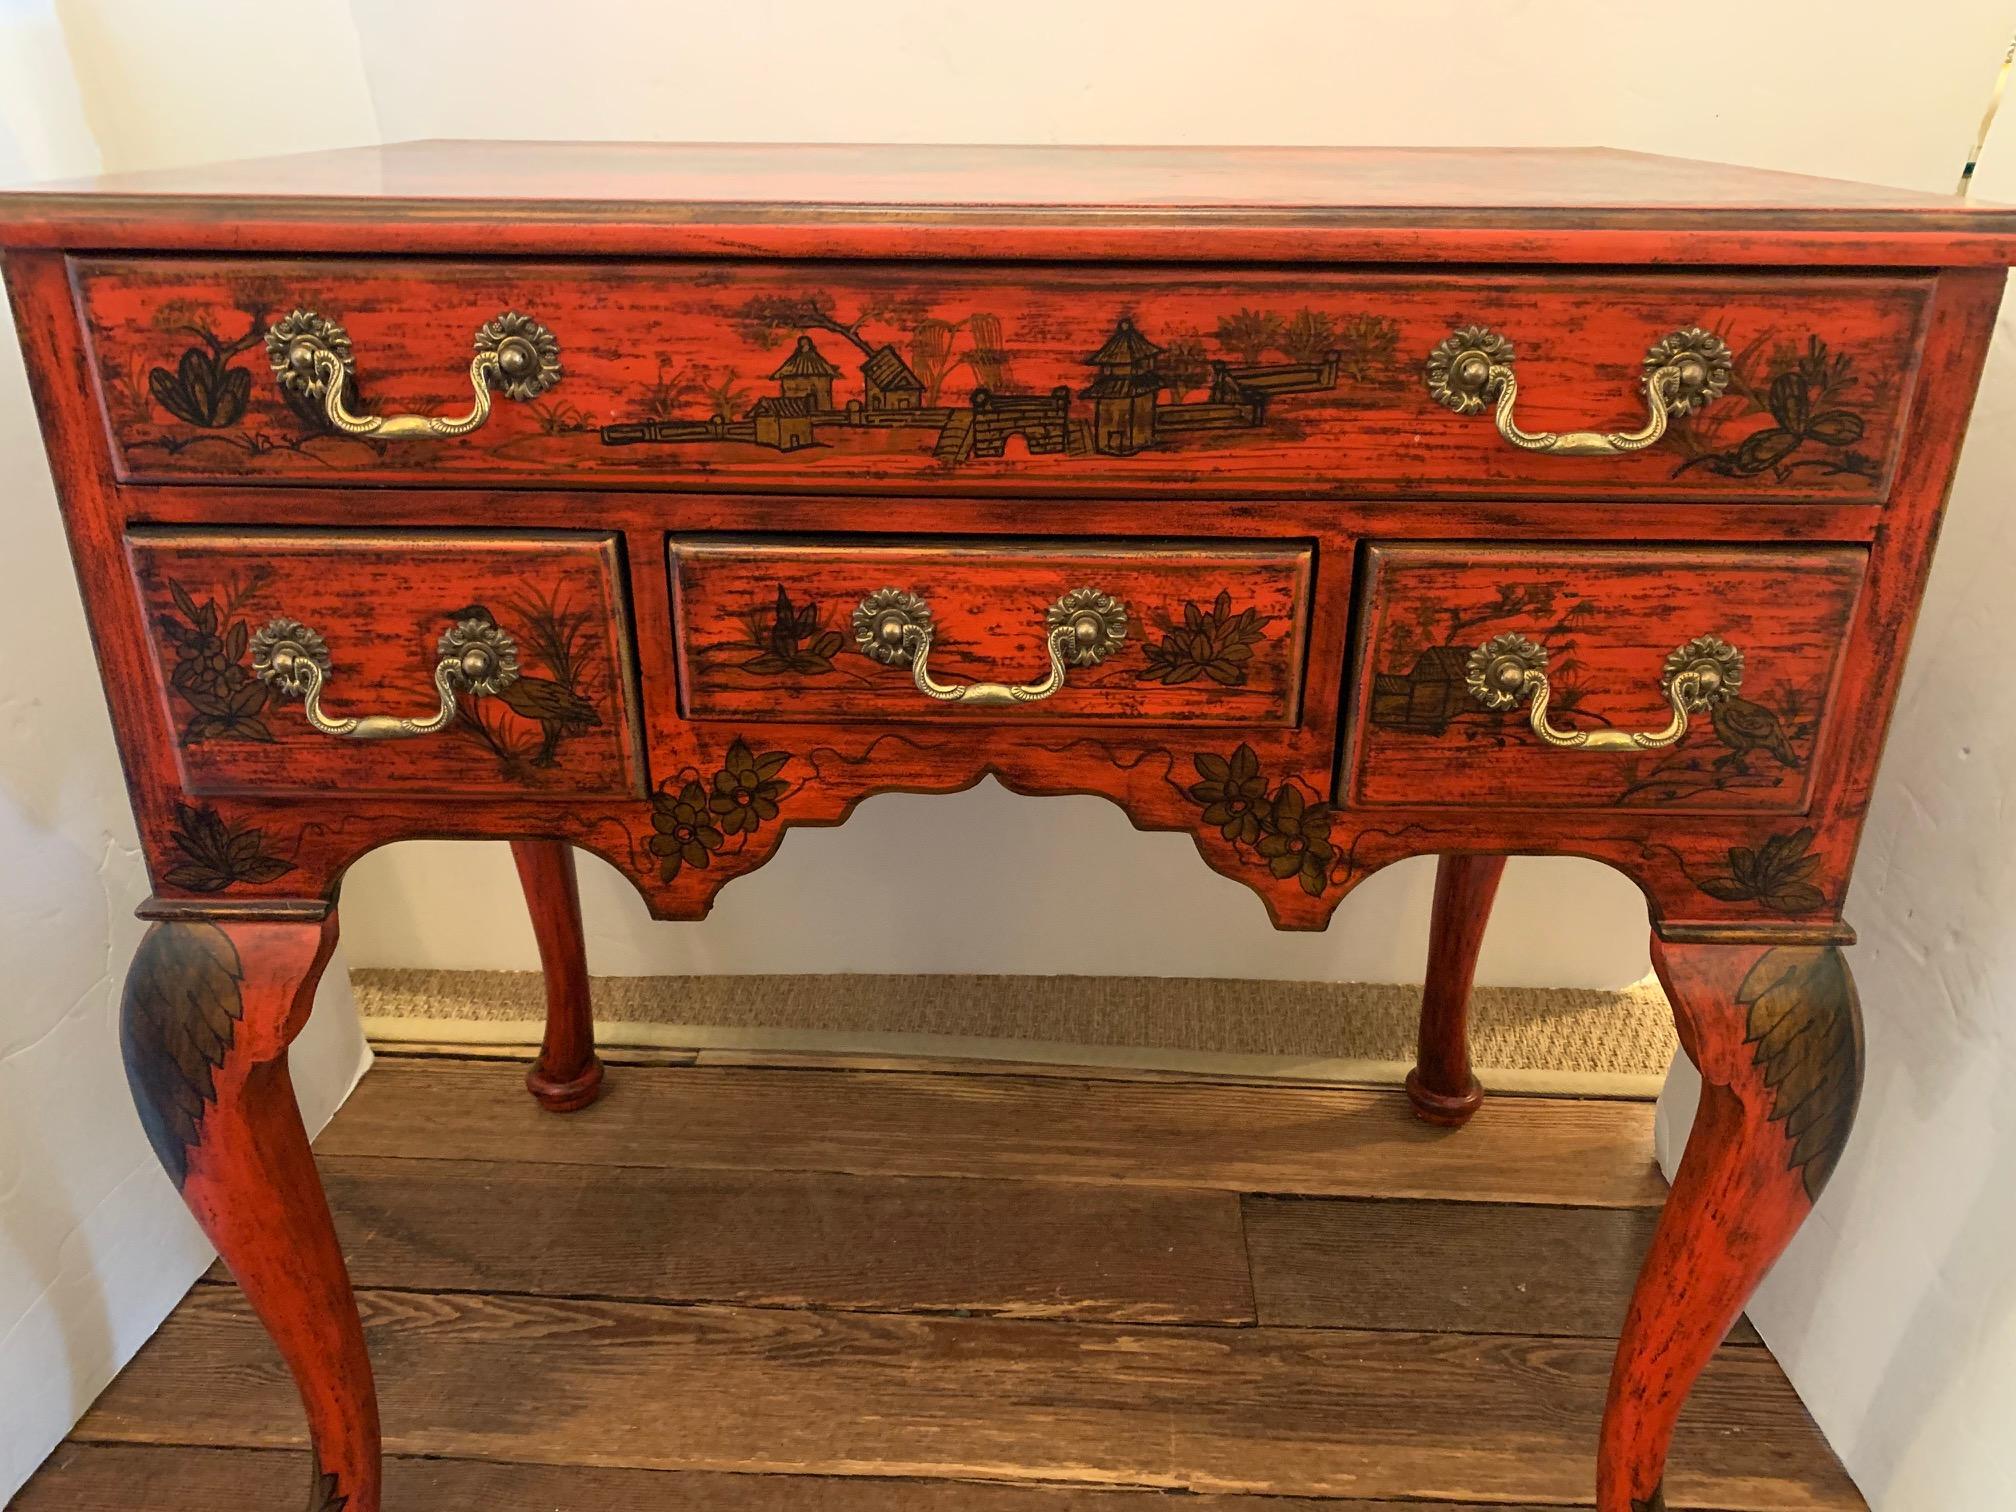 Scully & Scully Red & Gold Chinoiserie Console Sideboard with Drawers 1